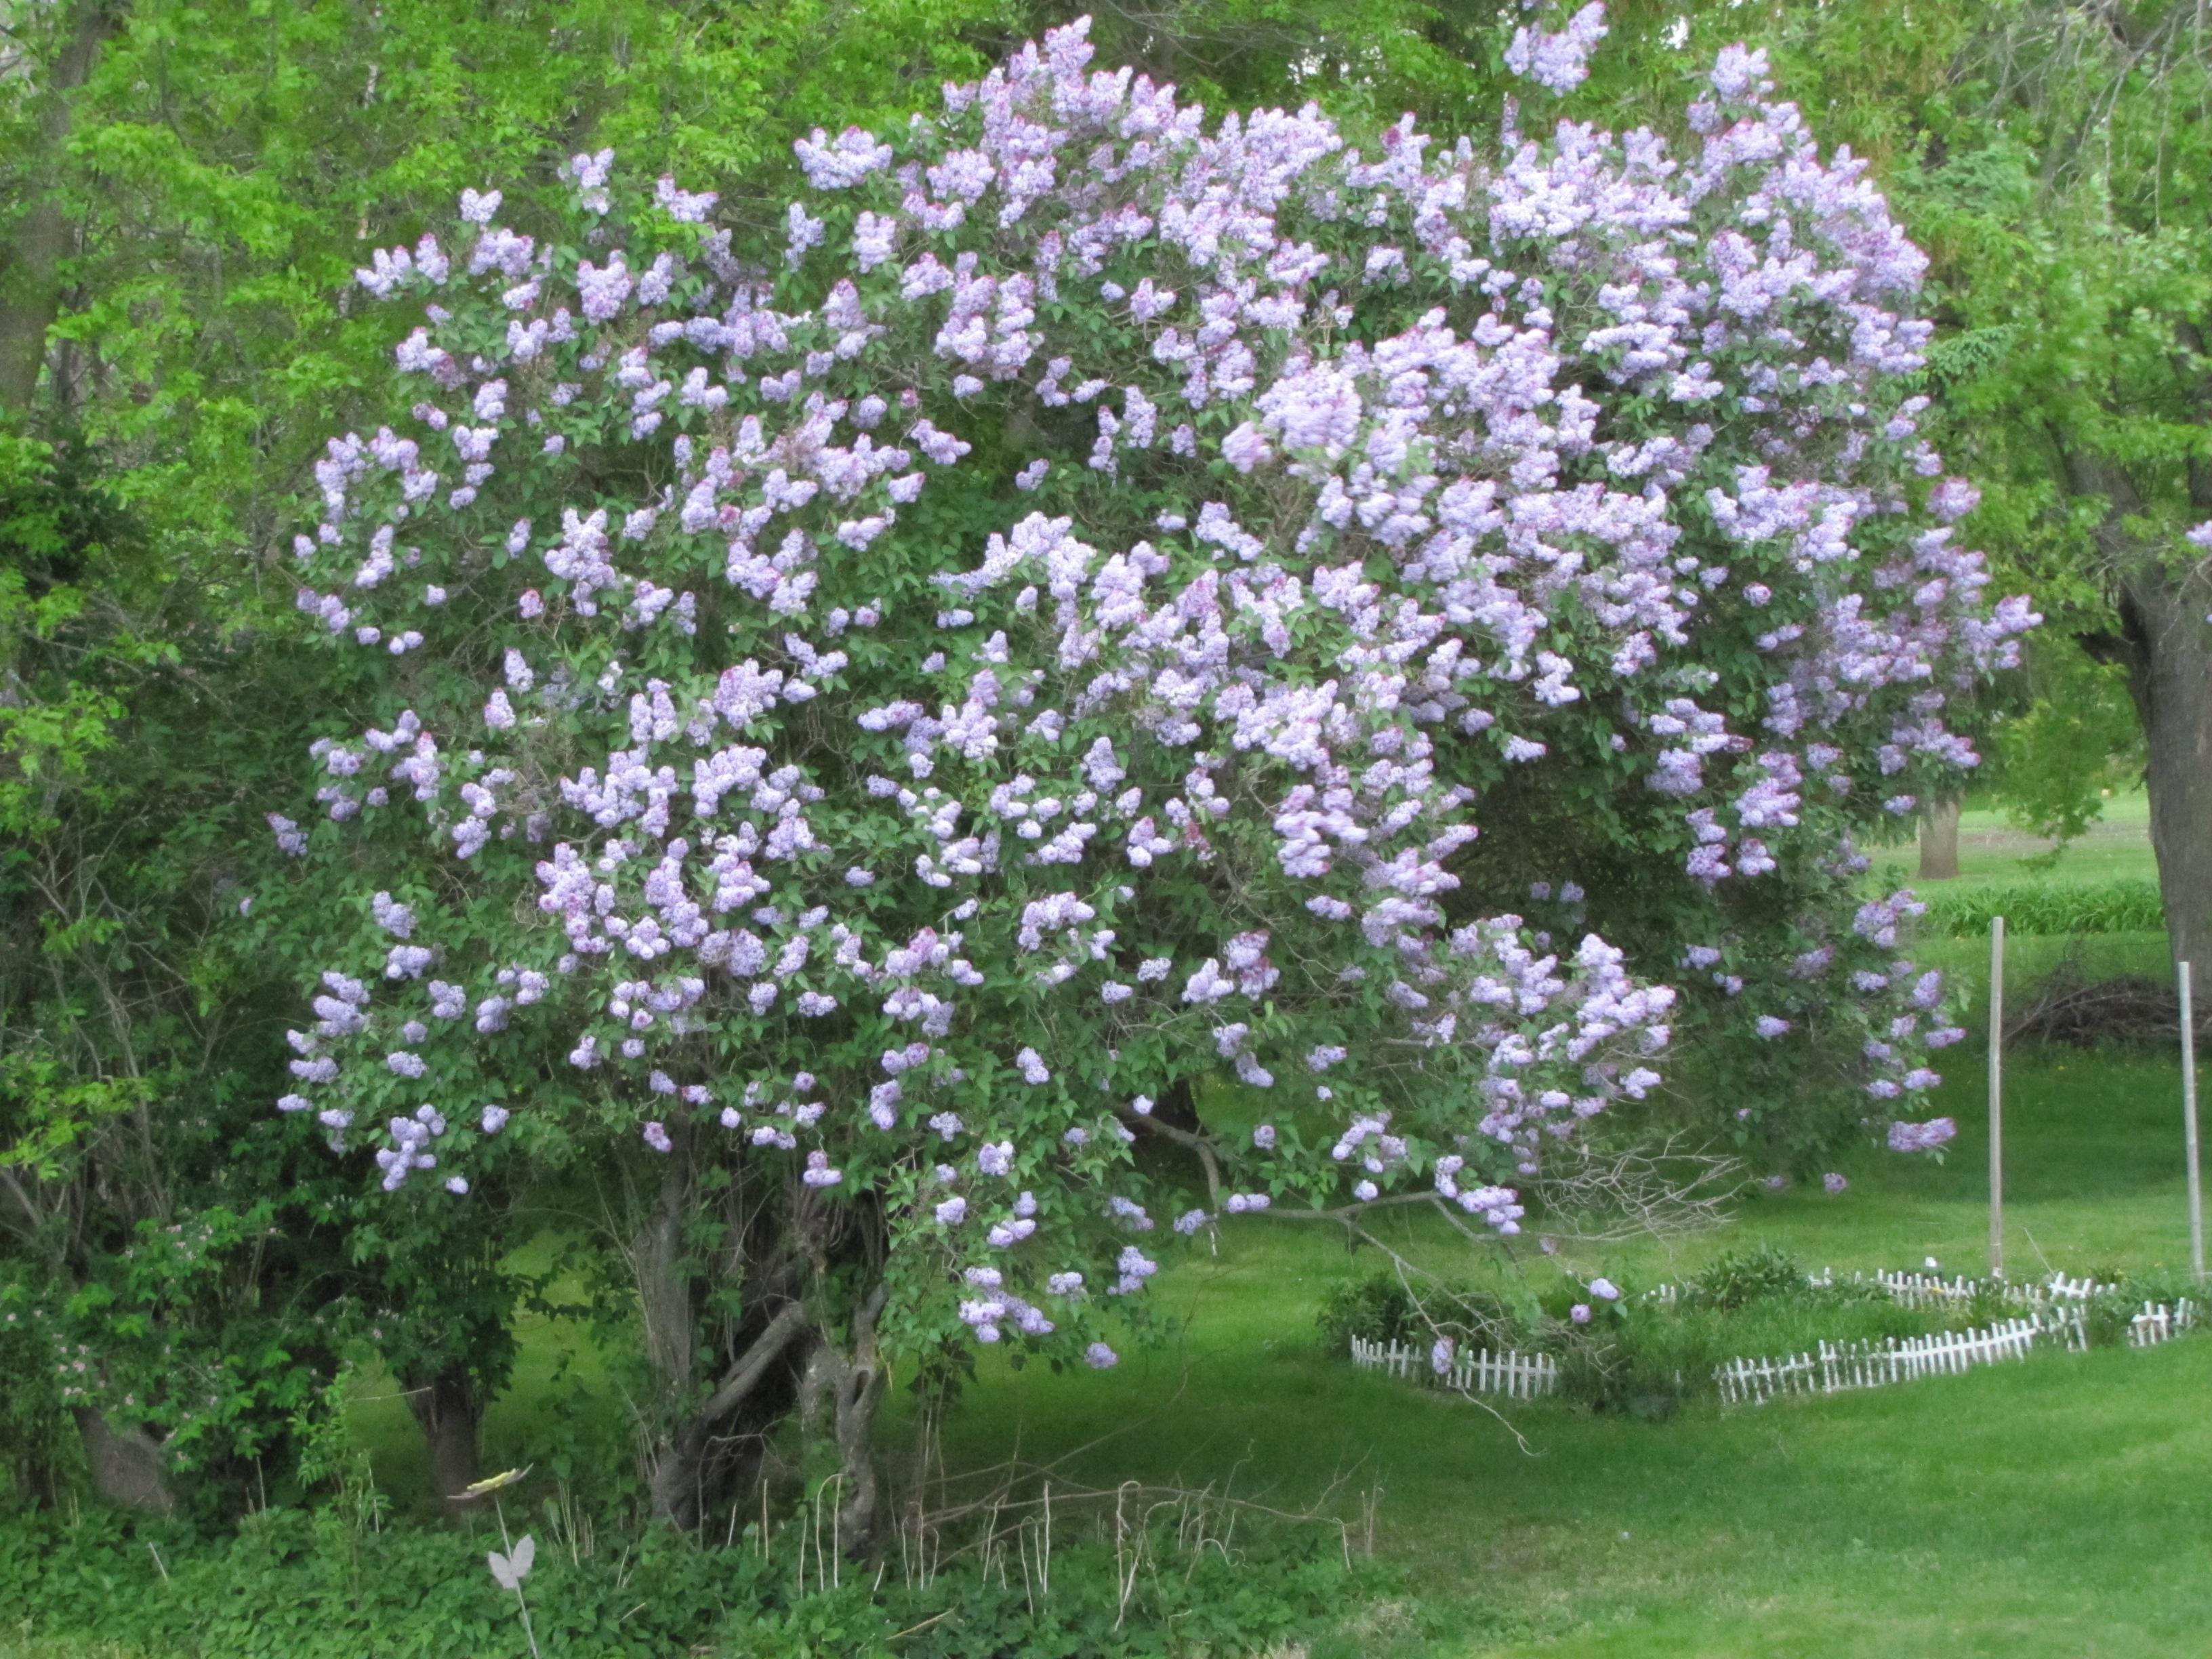 Lilac bushes   74231   High Quality and Resolution Wallpapers on